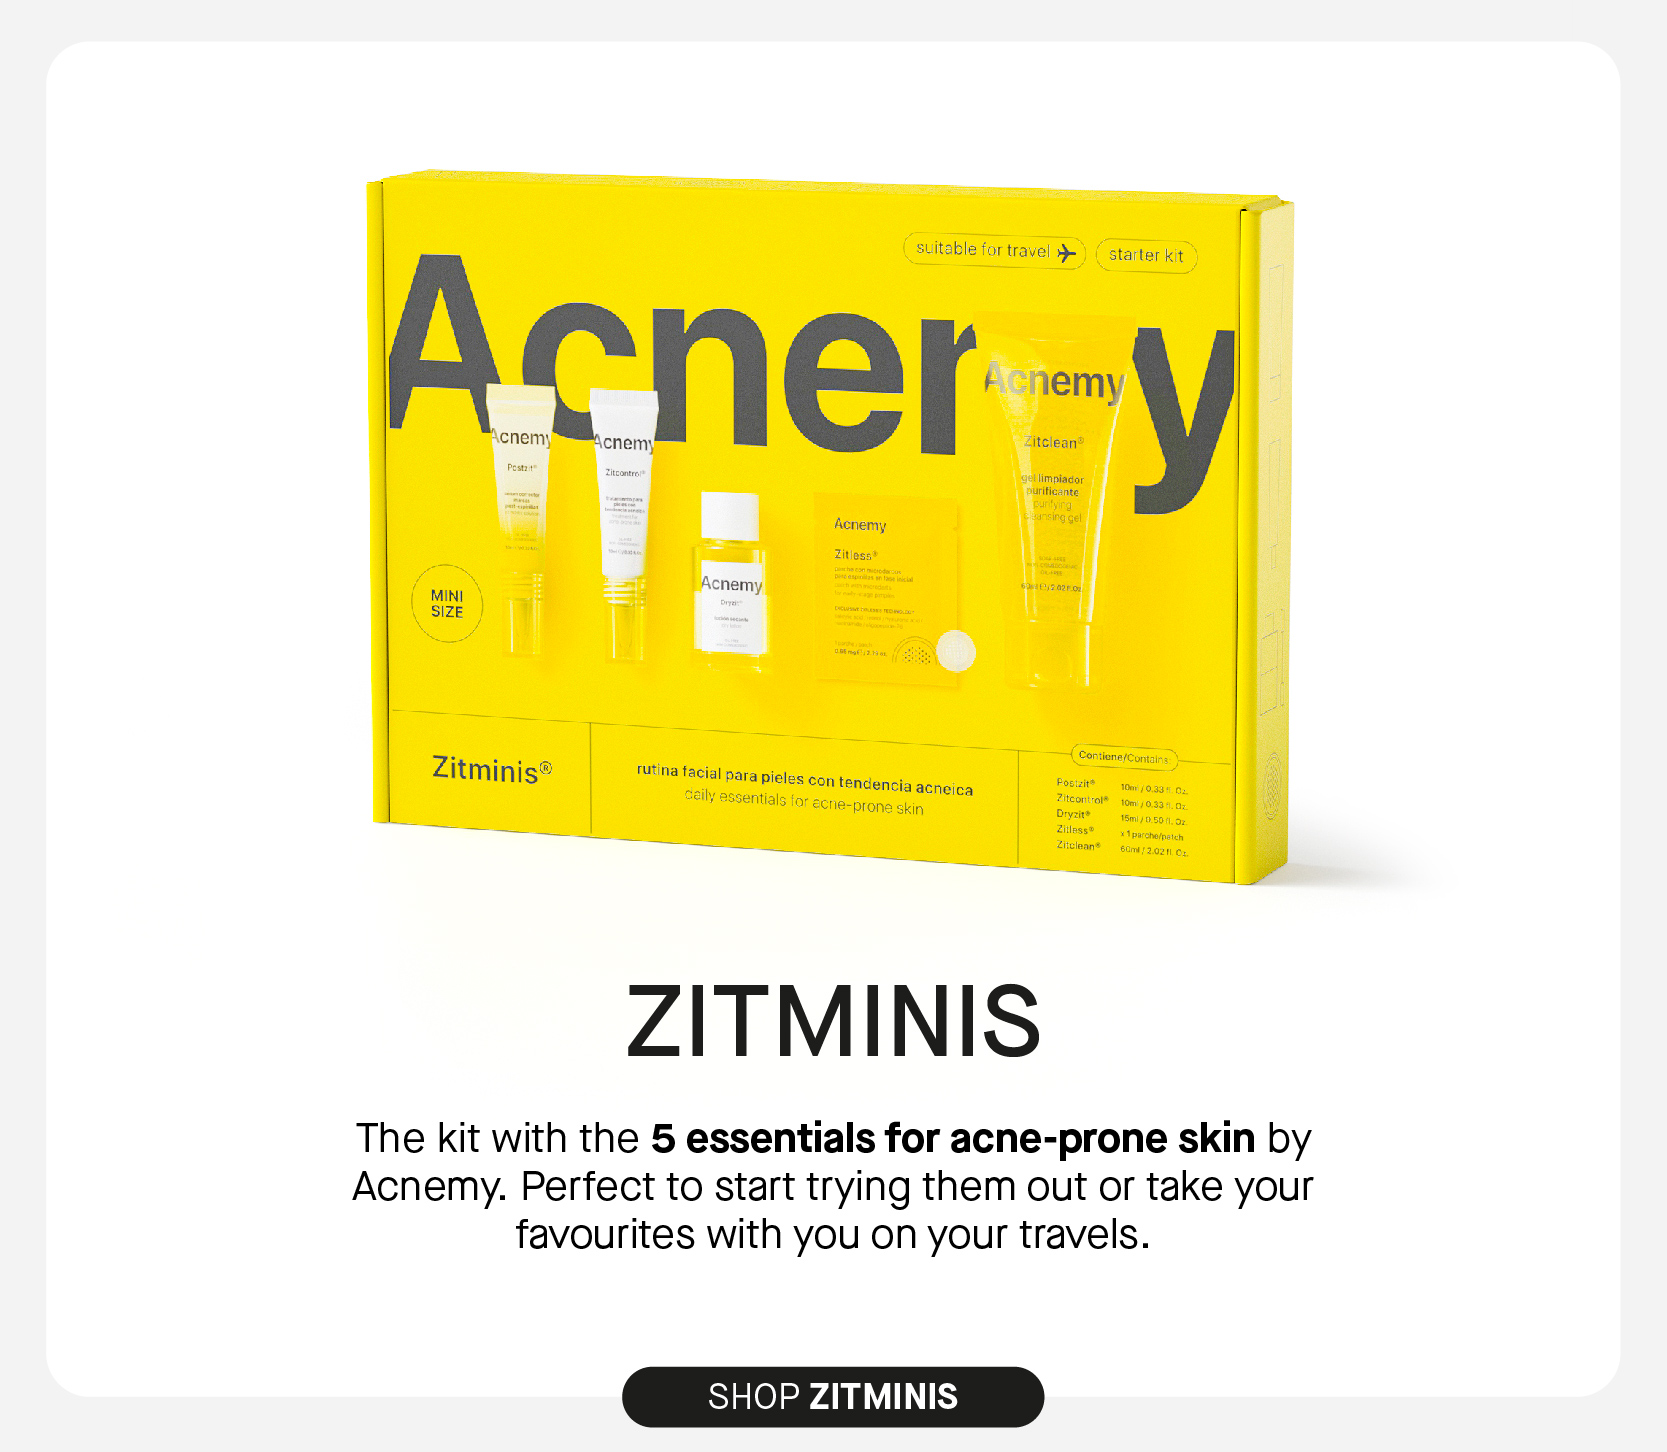 stitable for travel 9 starter kit A n : emy cnem icnemy ey Acnemy Zitjoss: Acnemy MINI SIZE Zitminis eles con tendencia acneica Is for " ECHie-prone skin ZITMINIS The kit with the 5 essentials for ache-prone skin by Acnemy. Perfect to start trying them out or take your favourites with you on your travels. SHOP ZITMINIS 